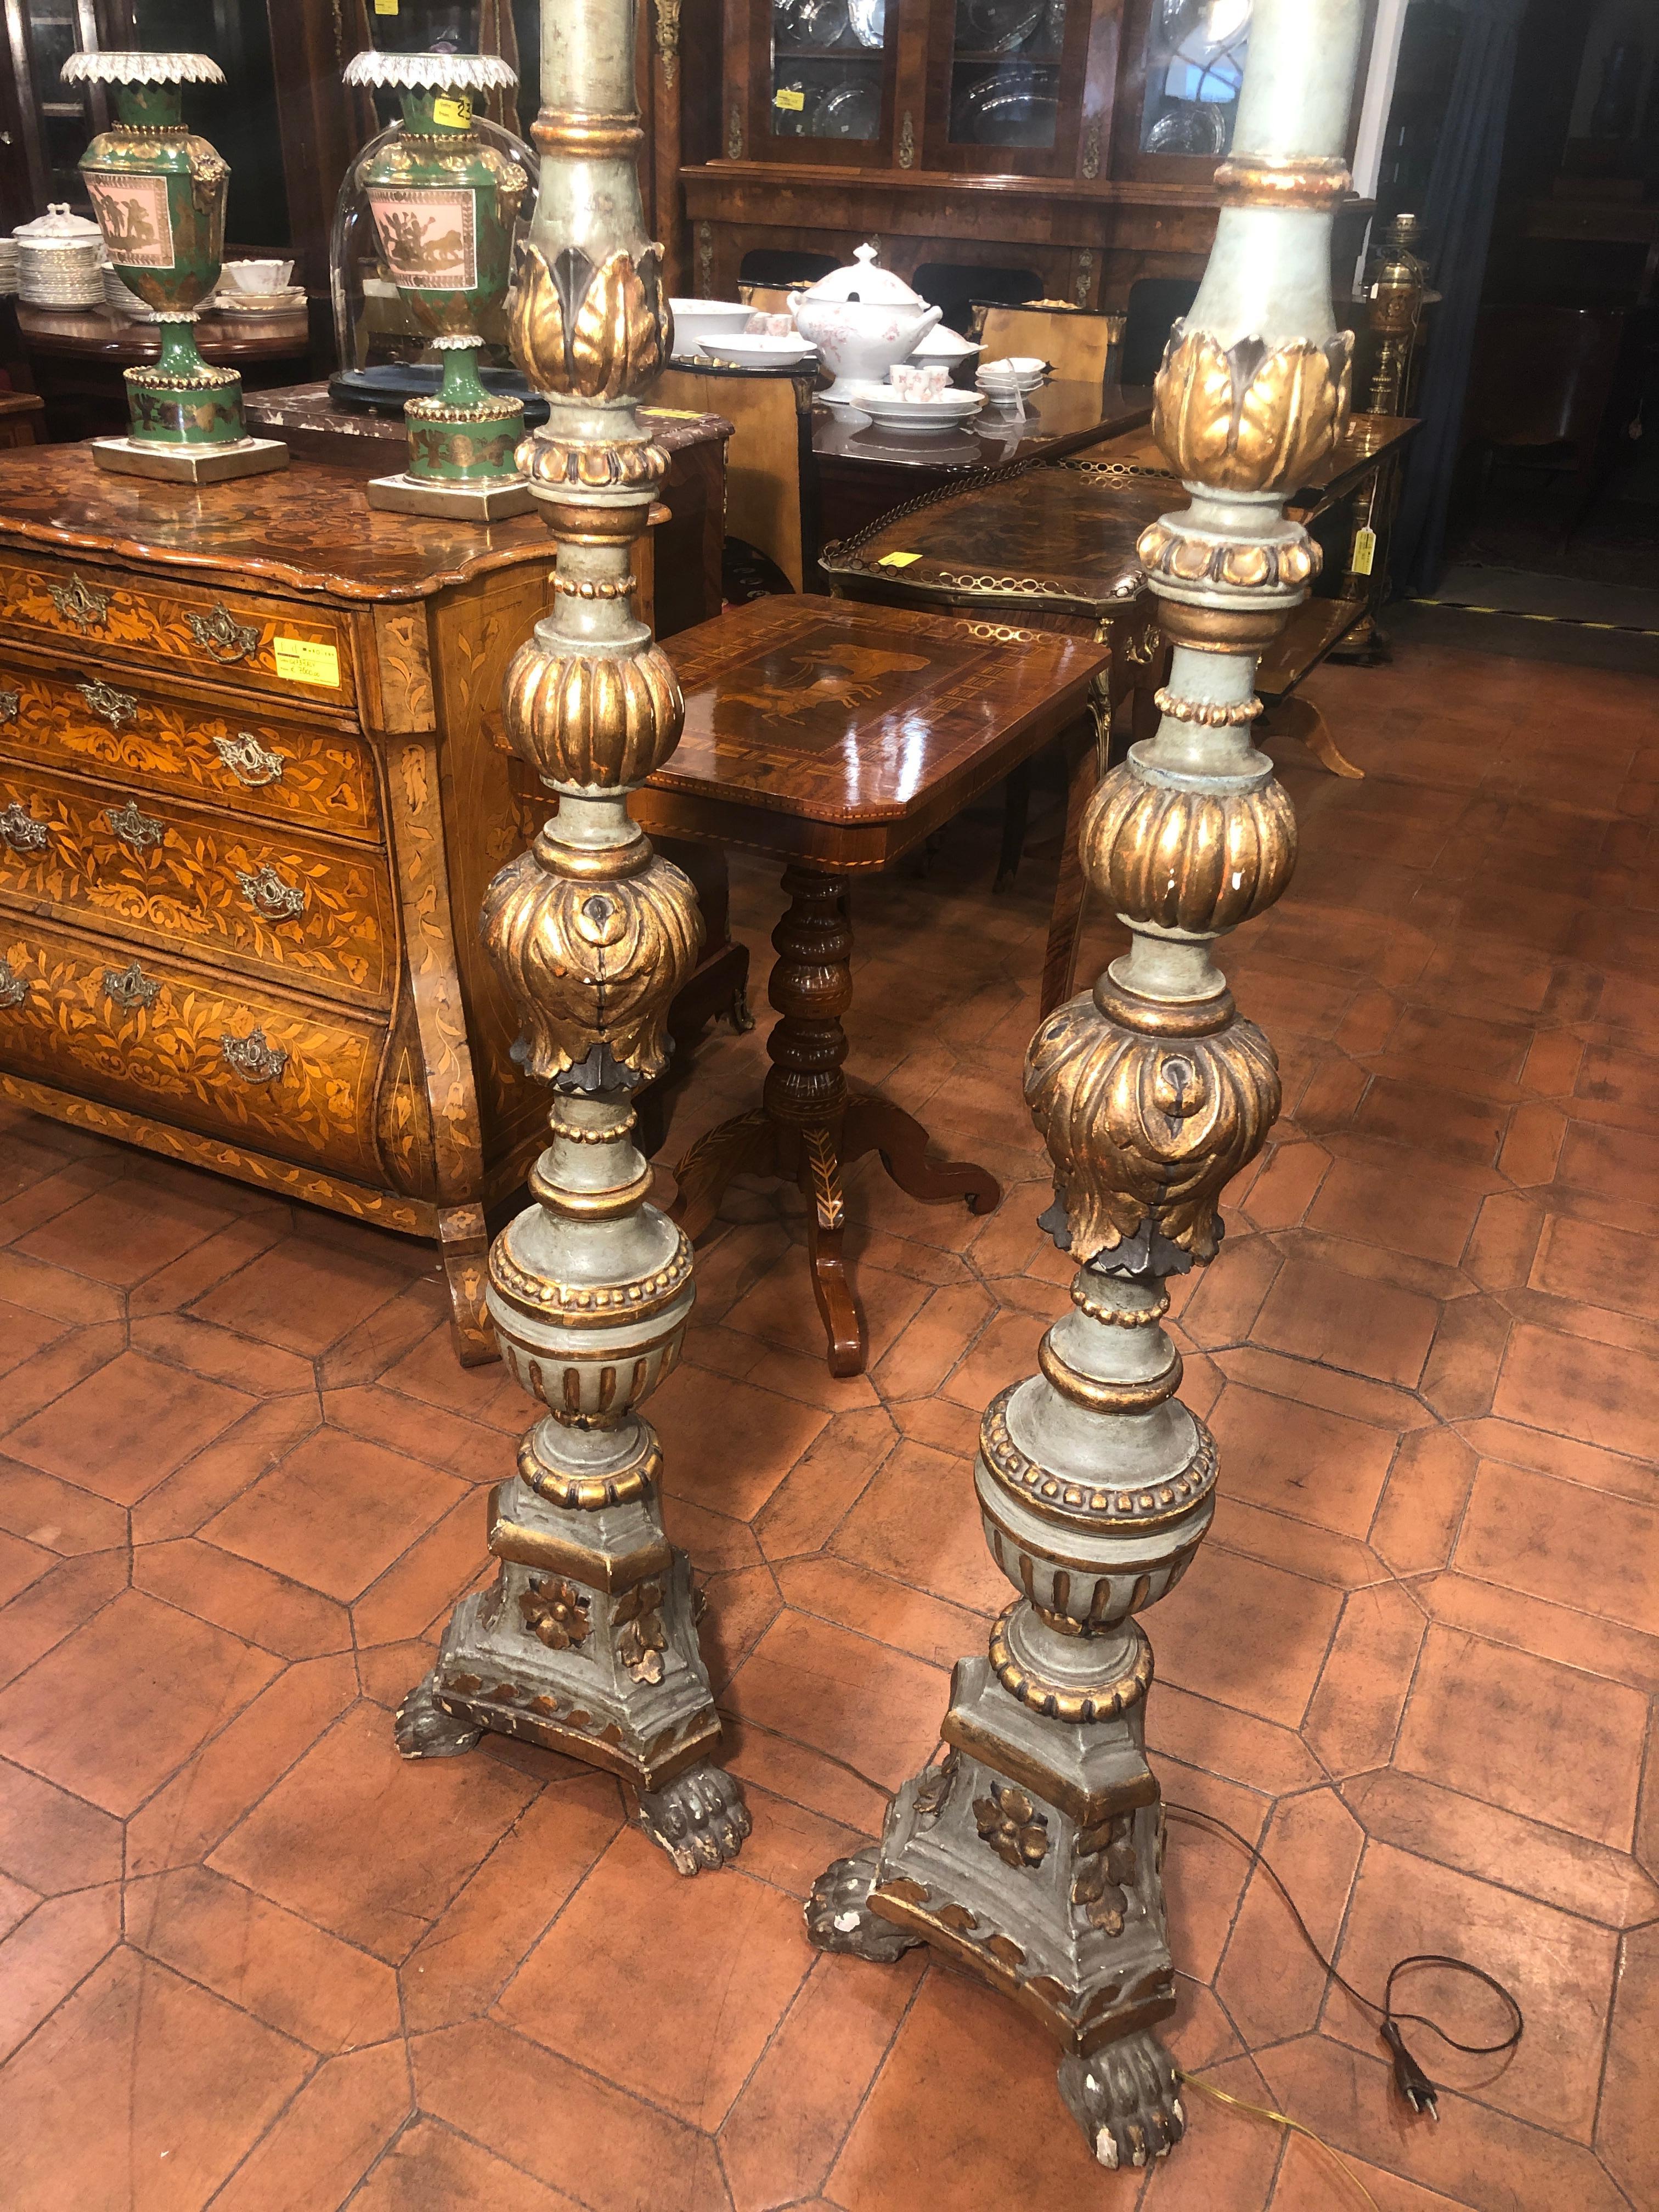 Pair of Venetian torches, lacquered and gilded, were electrified at a later date, the second half of the nineteenth century. In excellent structural aesthetic condition. A fine example of Veneto woodworking activity, in the execution of turnings.